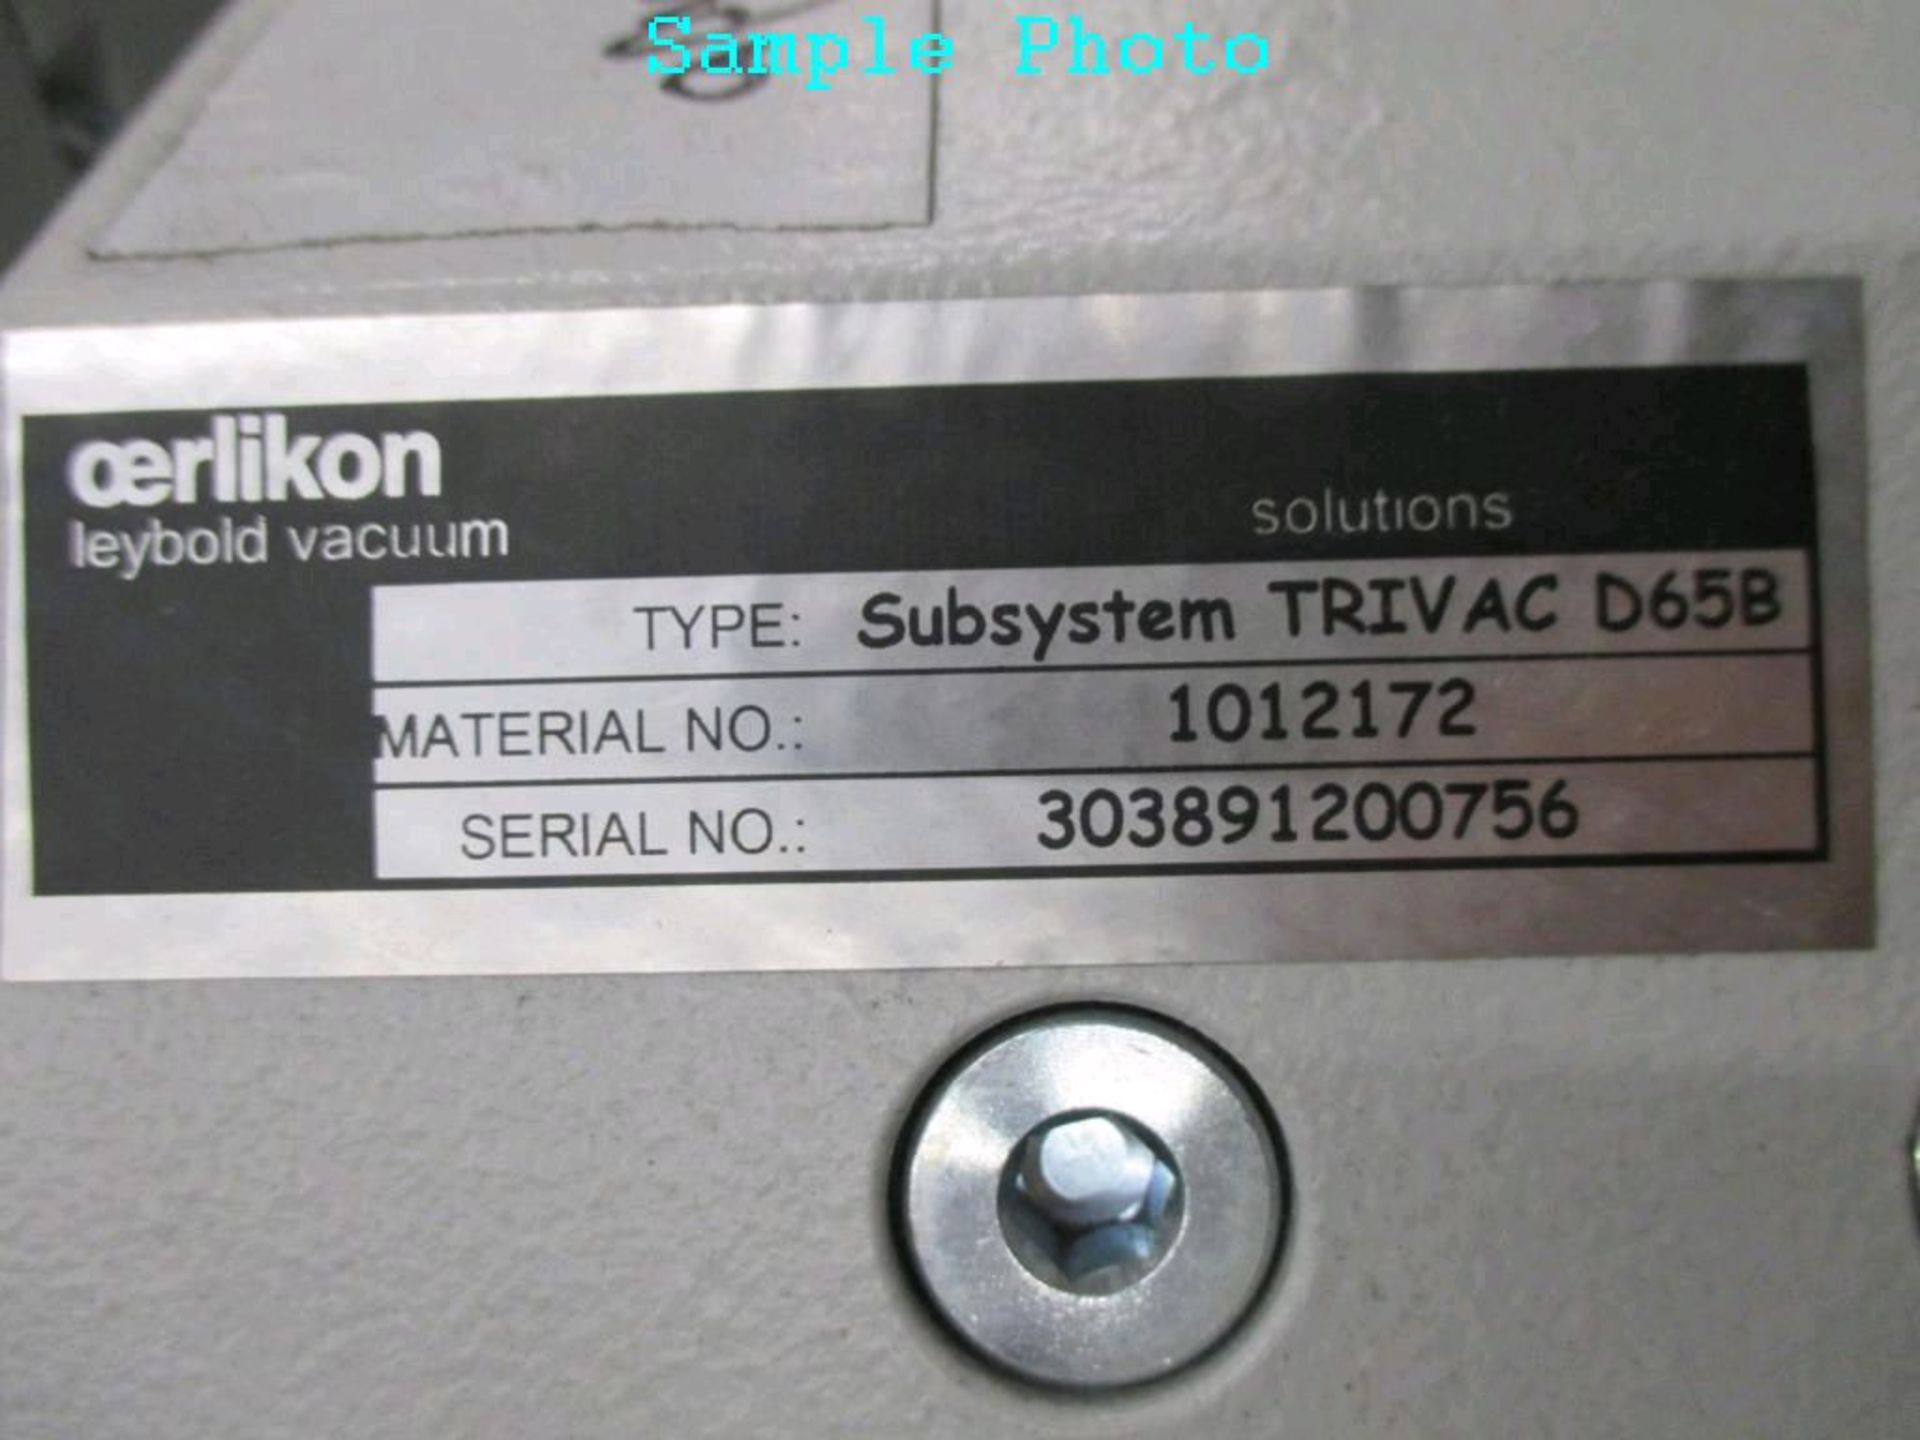 Oerlikon Leybold D65B Lot Includes (1) Trivac D65B Vacuum Pump (mfg. 2014). Asset Located at 3WAY - Image 3 of 8